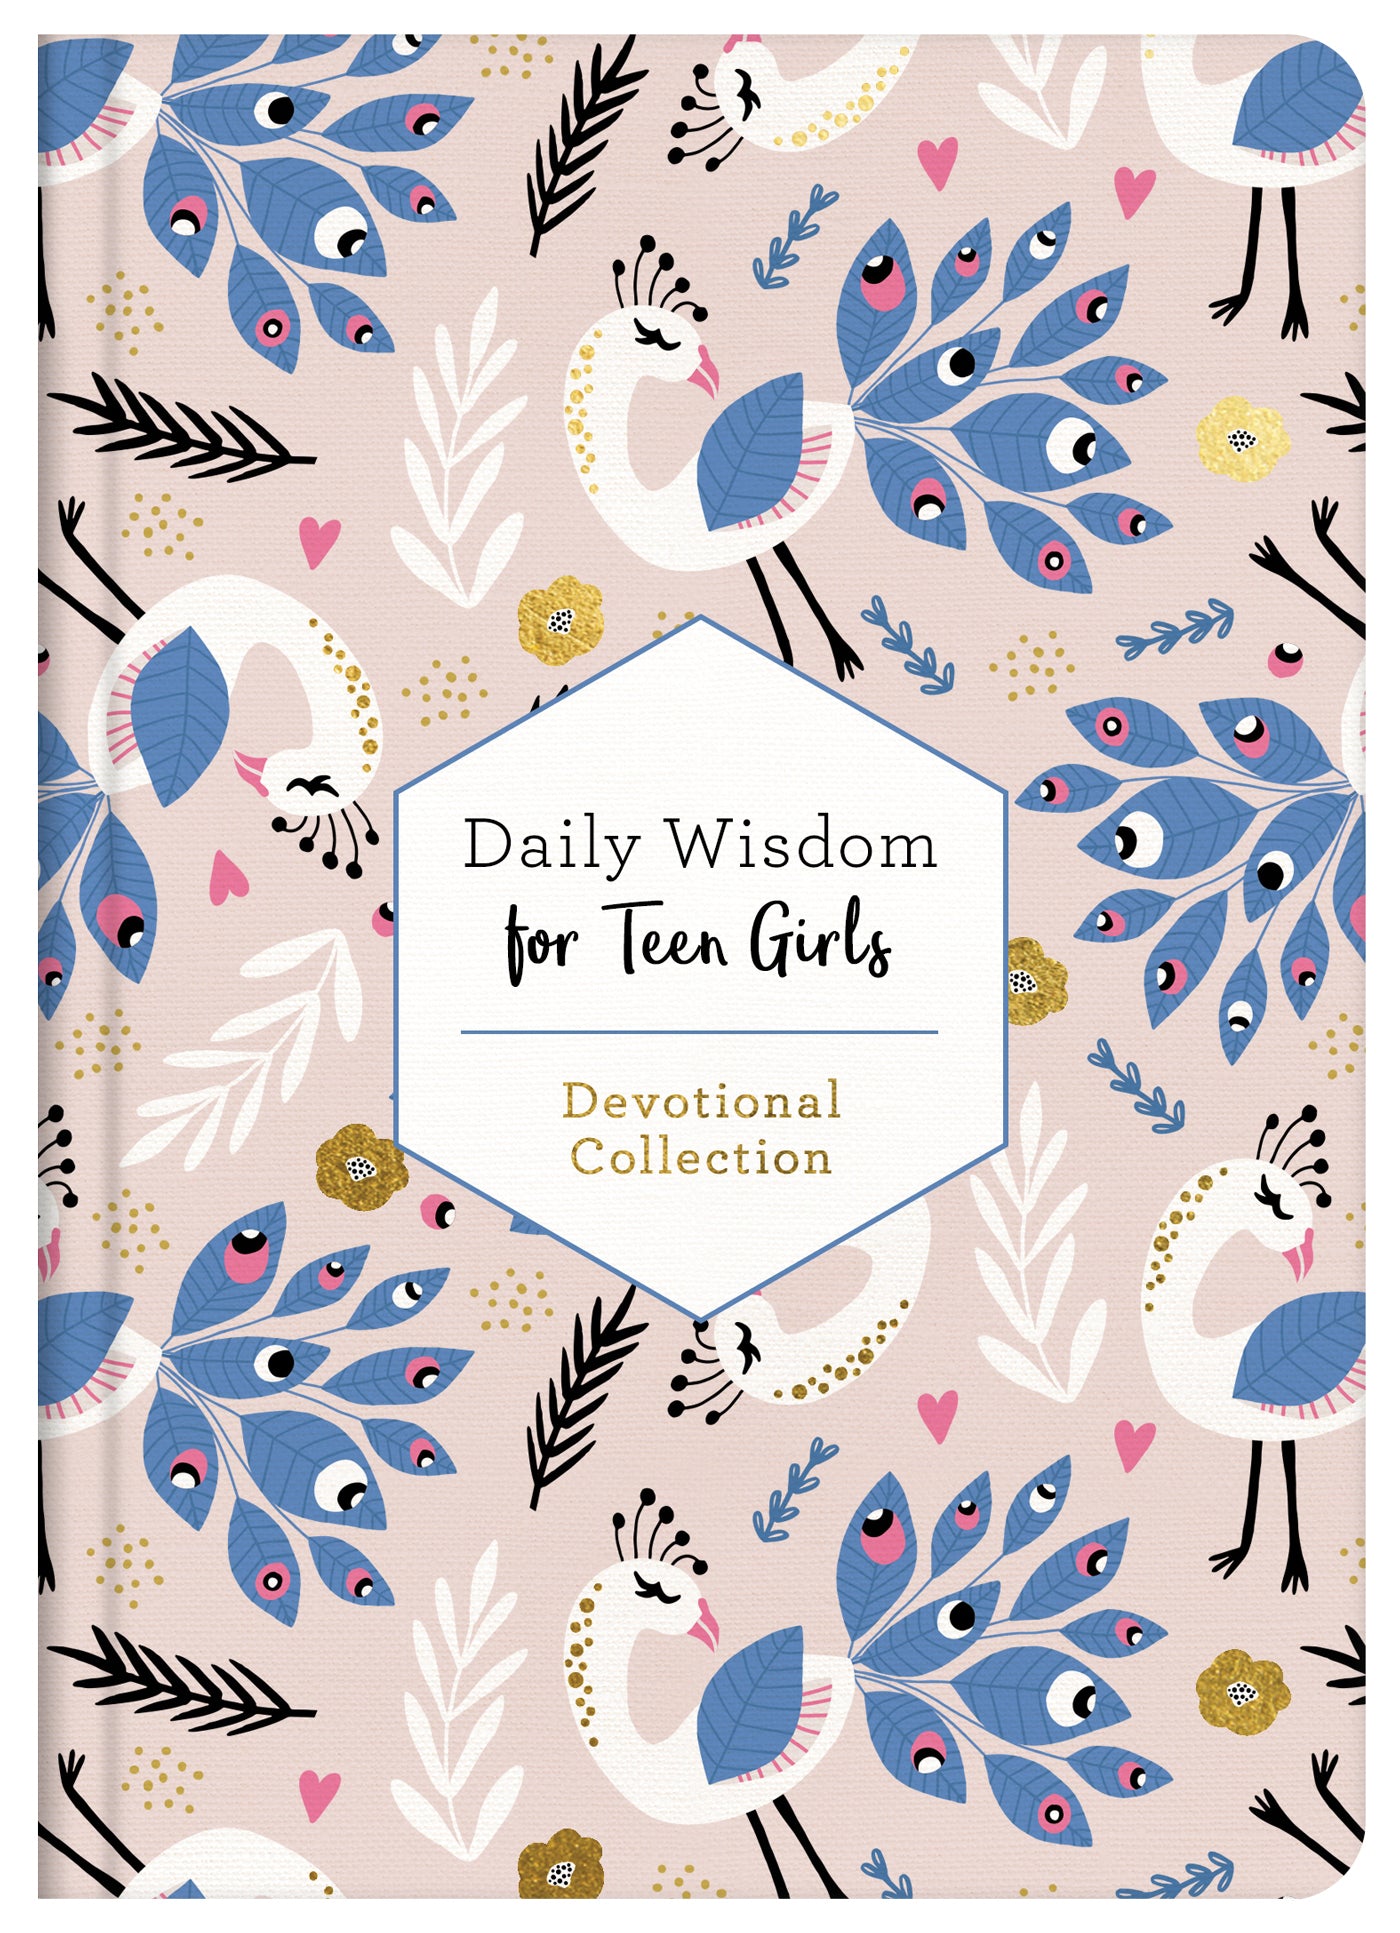 Daily Wisdom for Teen Girls - The Christian Gift Company